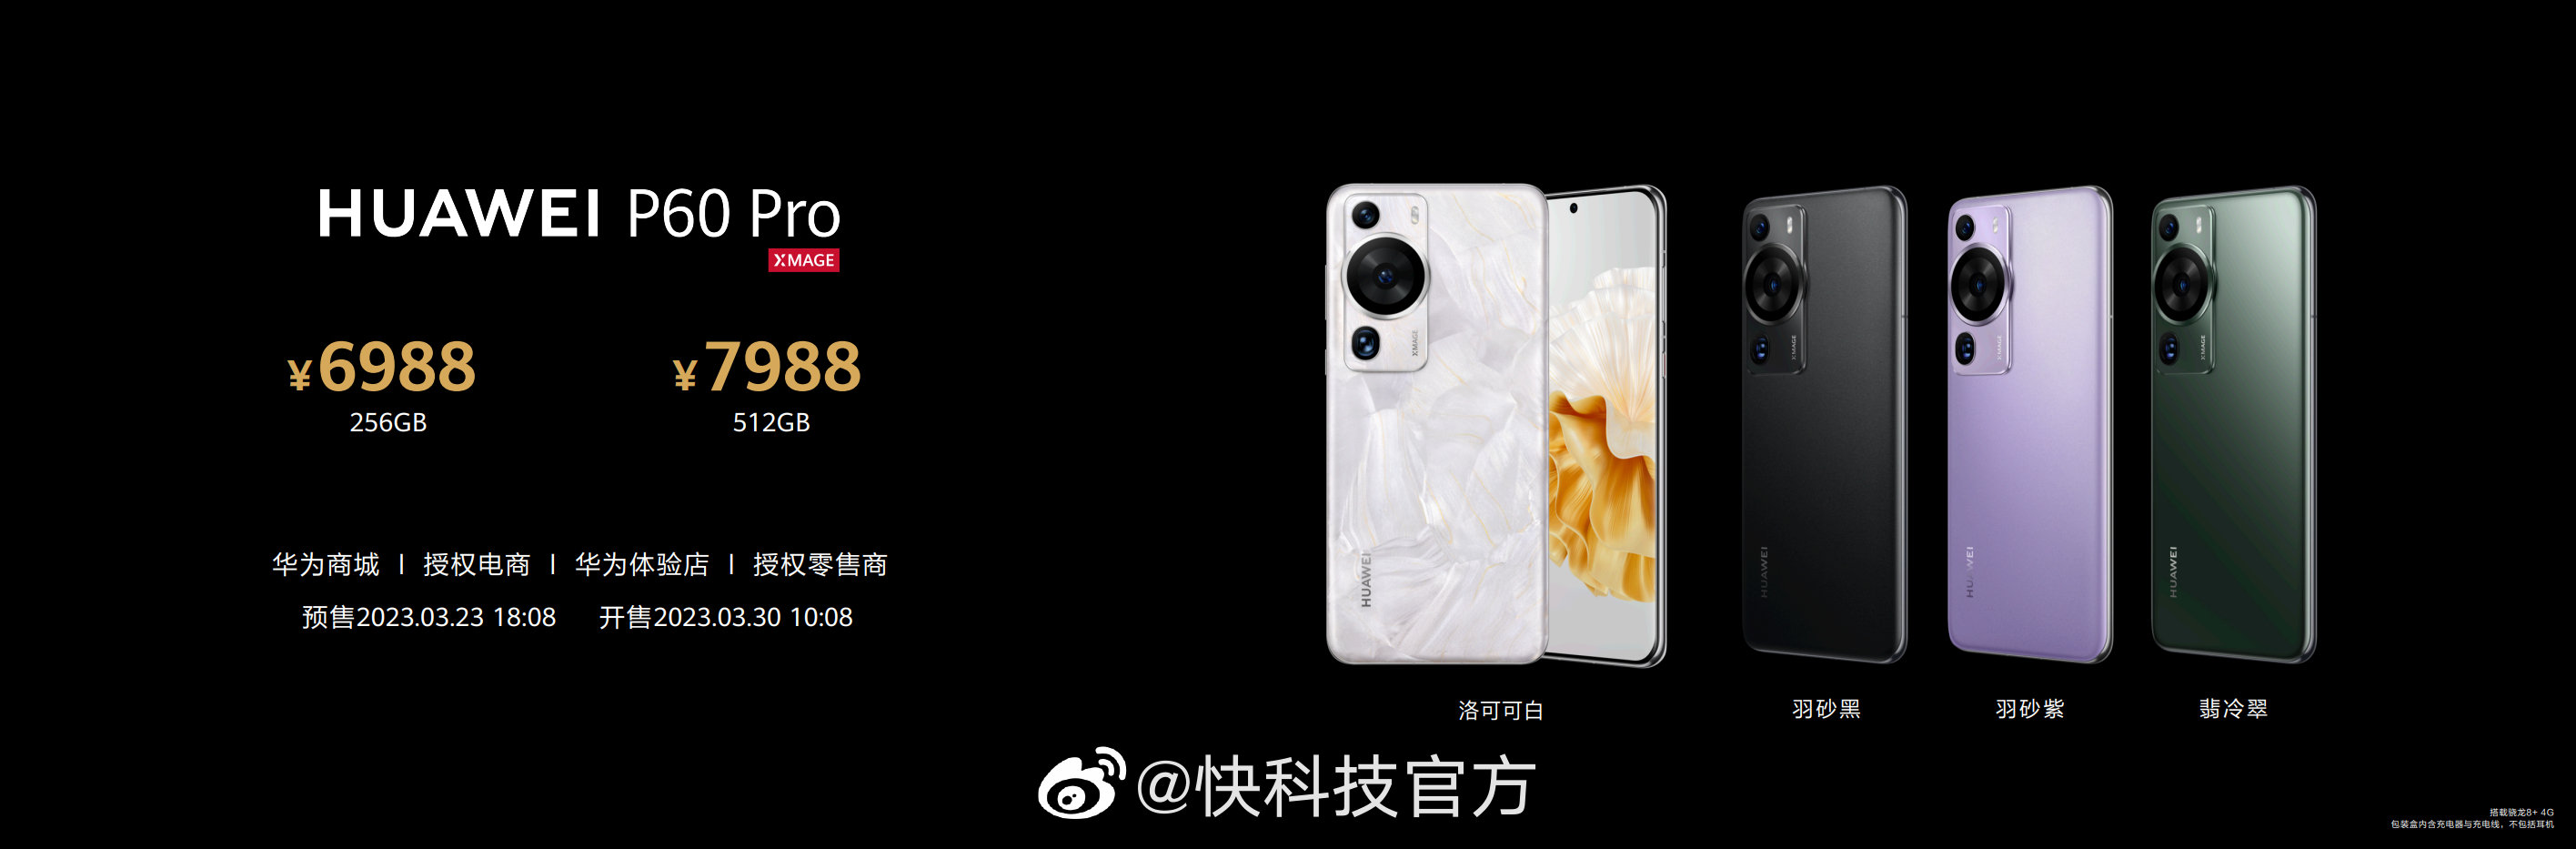 Huawei P50 and P50 Pro announced with Snapdragon 888 4G Chipset - Tech ...